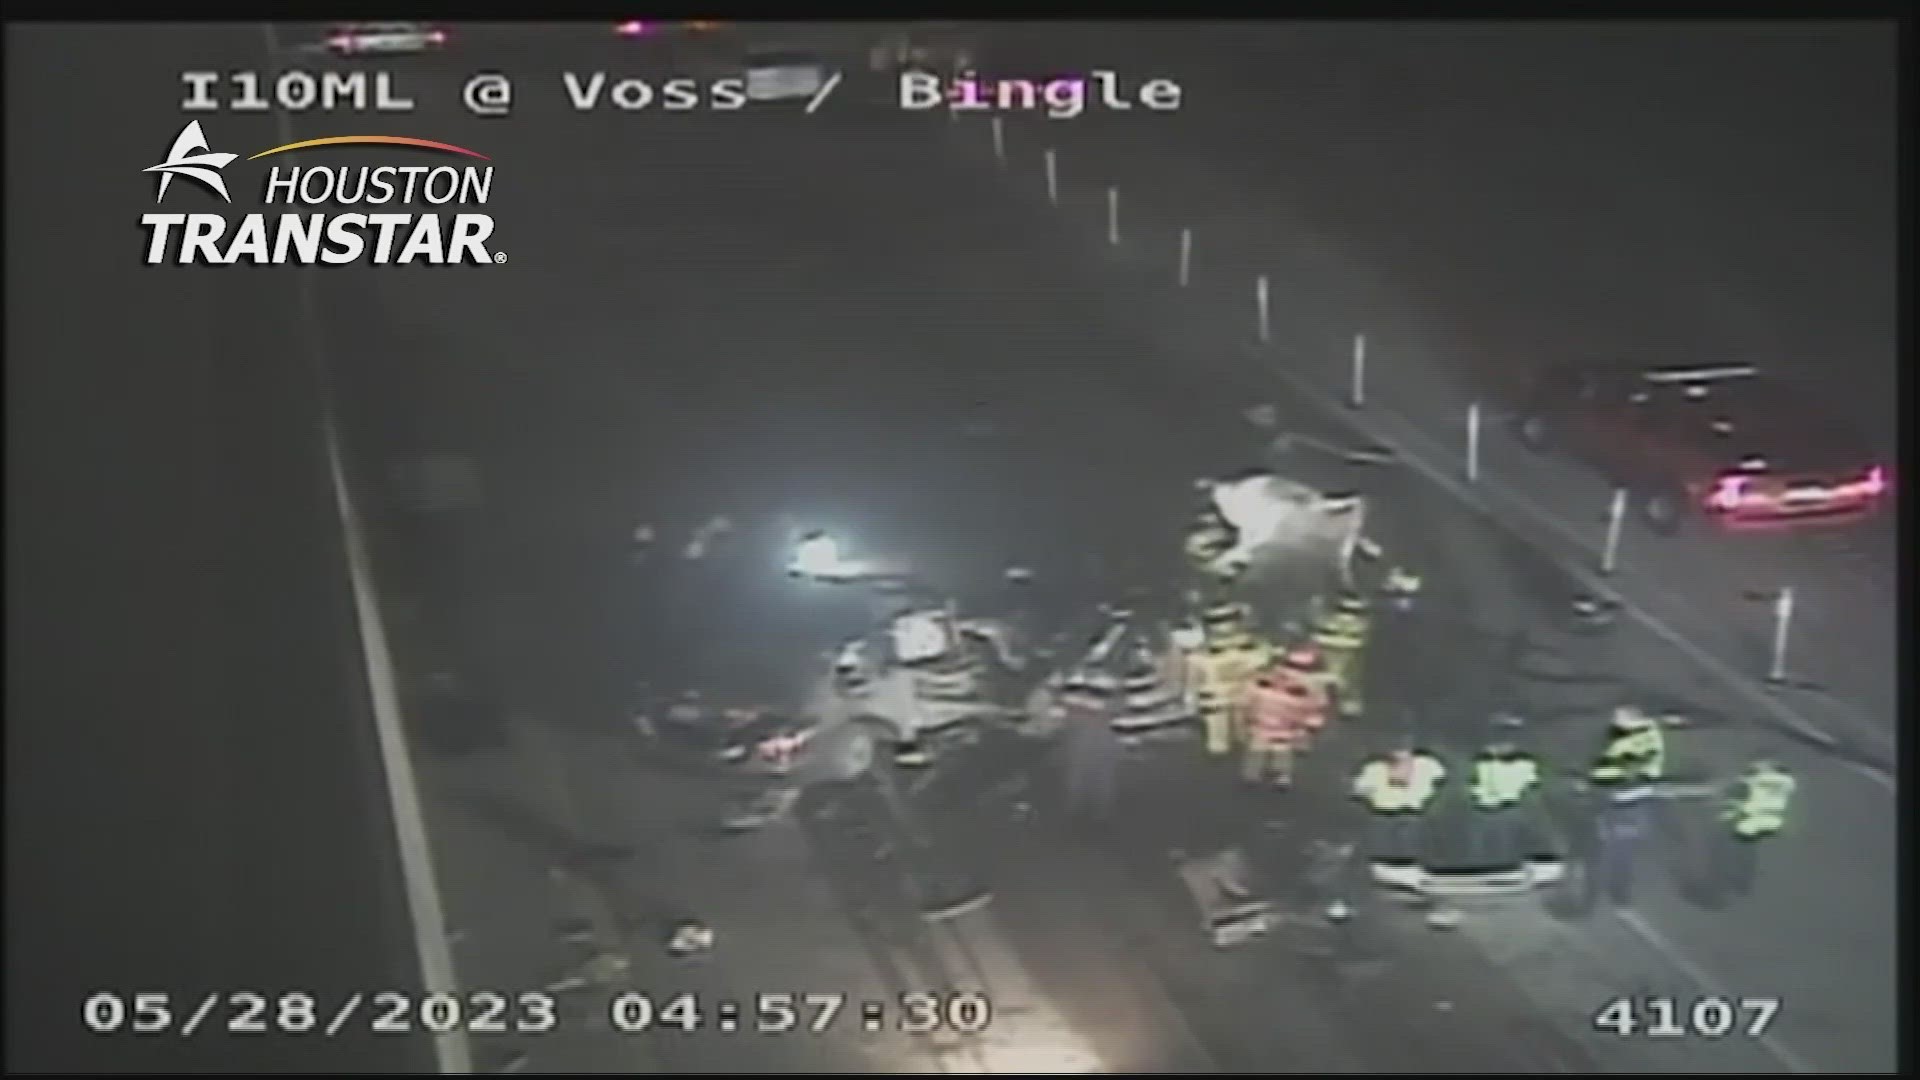 Crews cleared the scene on I-10 at Bingle around 6 a.m. Sunday.